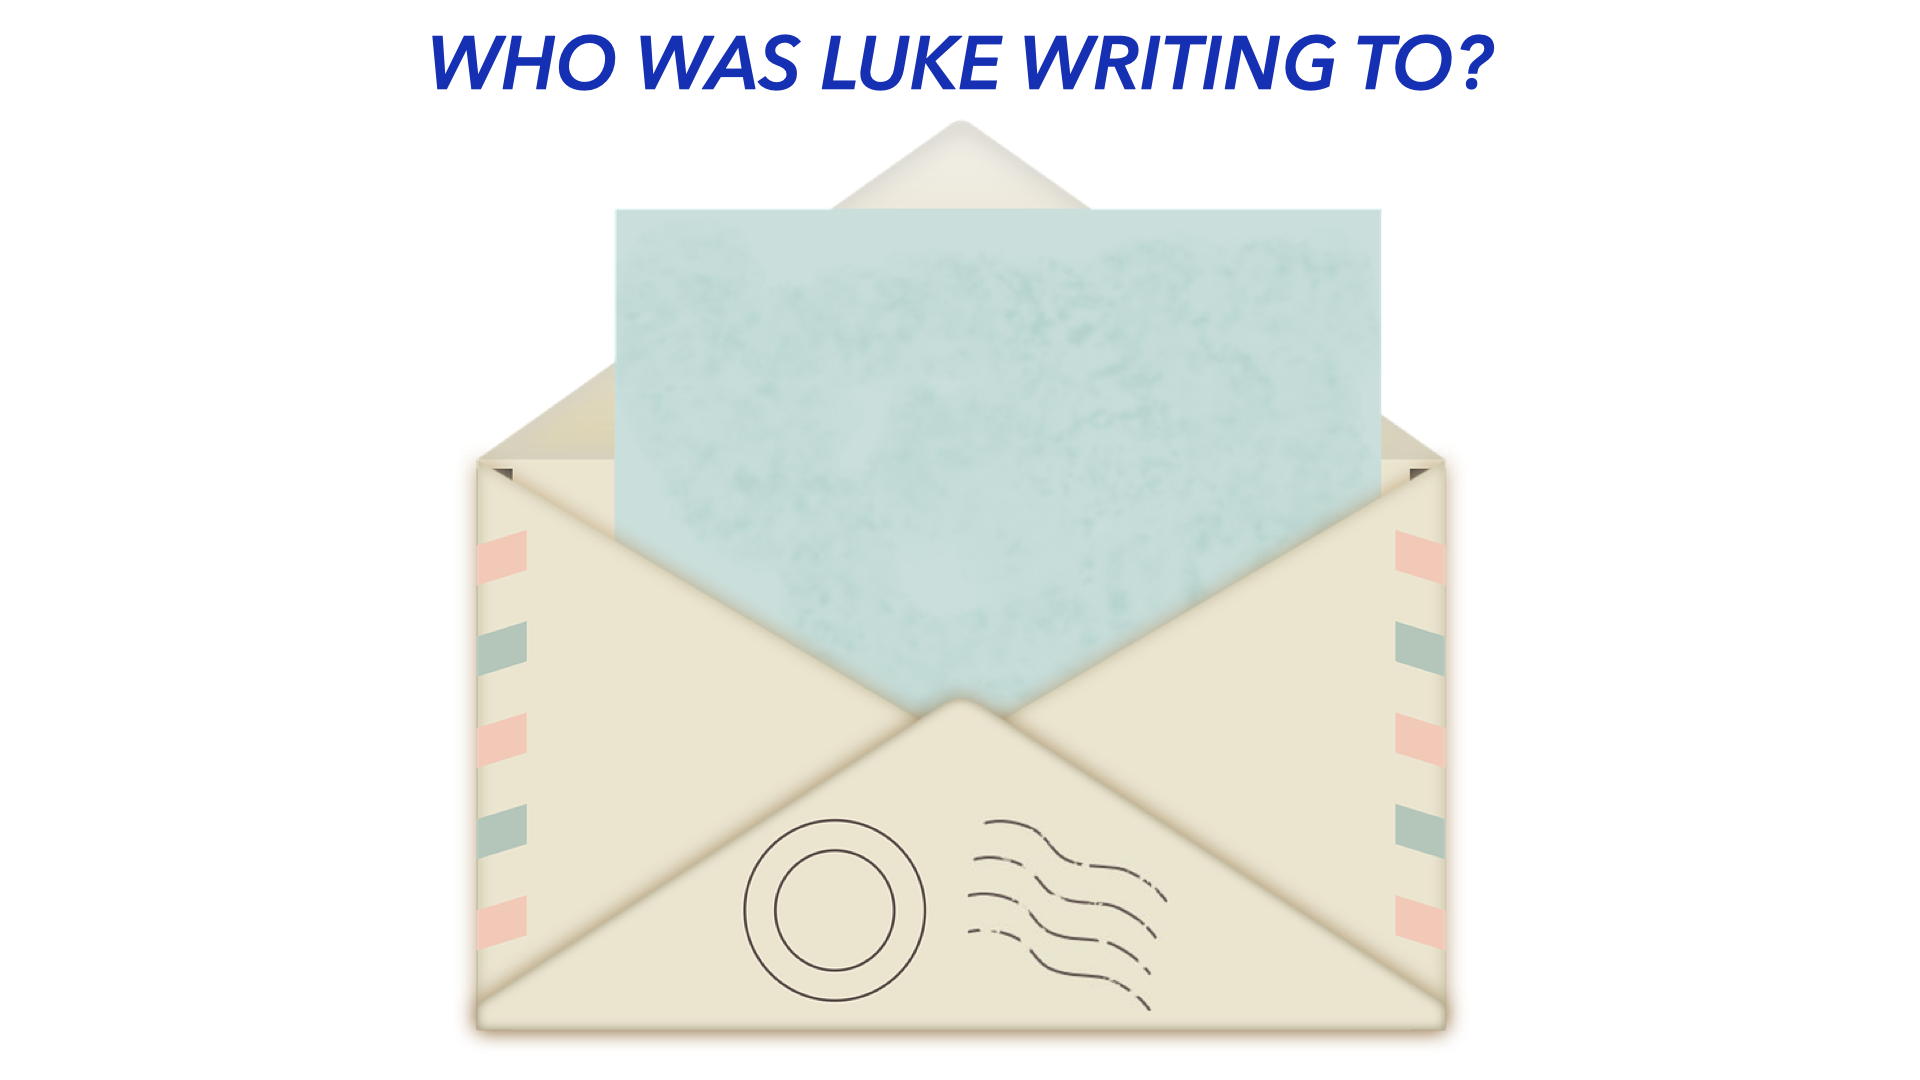 Who Was Luke Writing to in his Gospel?